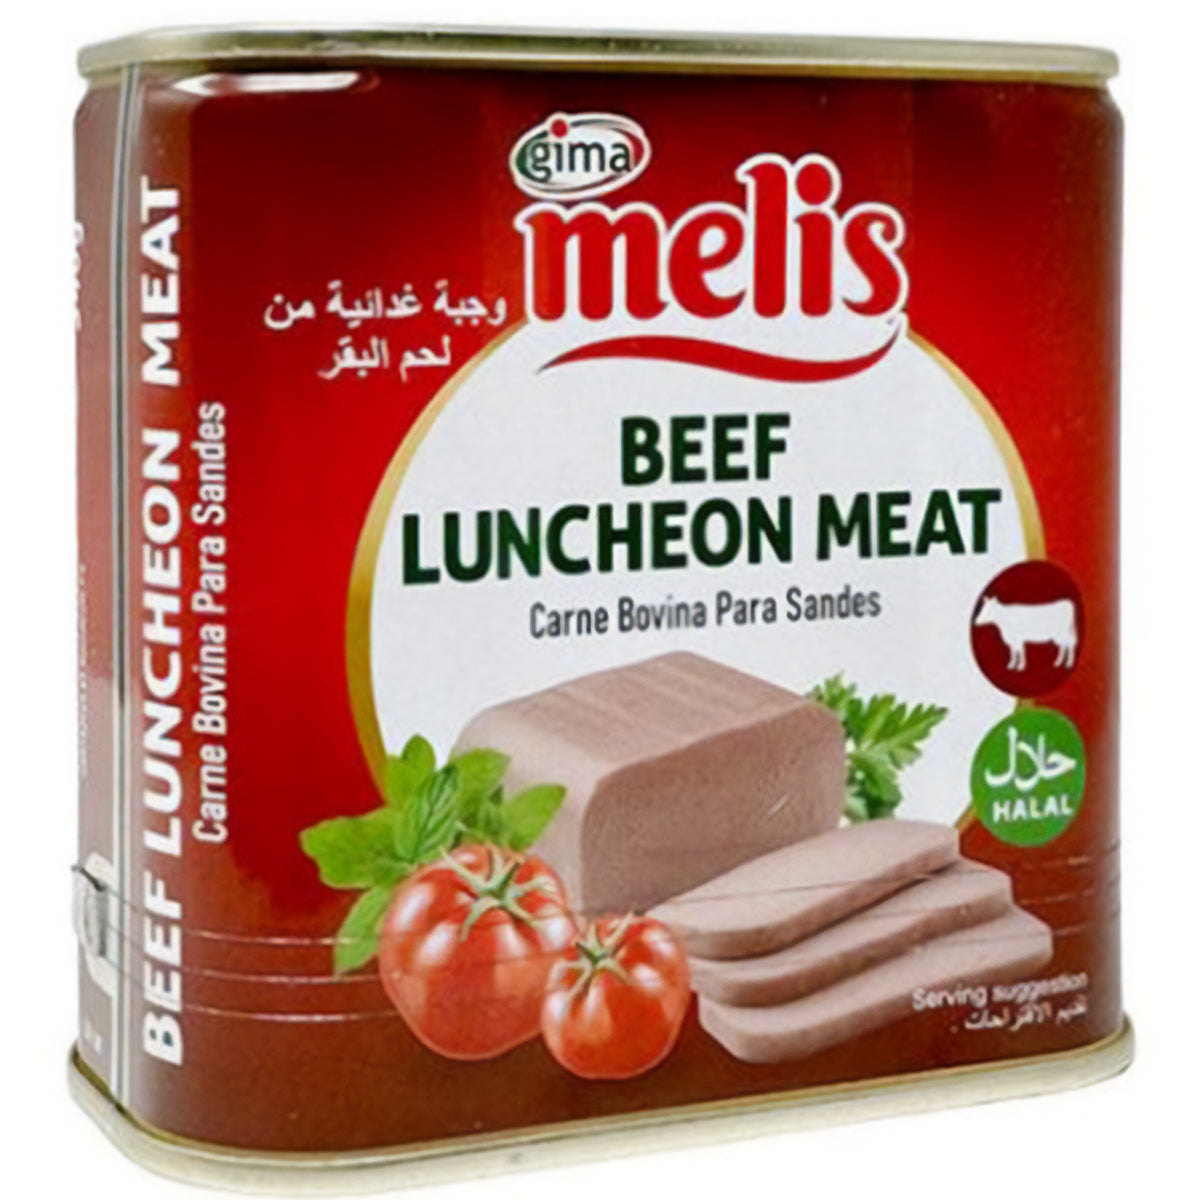 Gima - Melis Beef Luncheon Meat (Halal) in a tin.